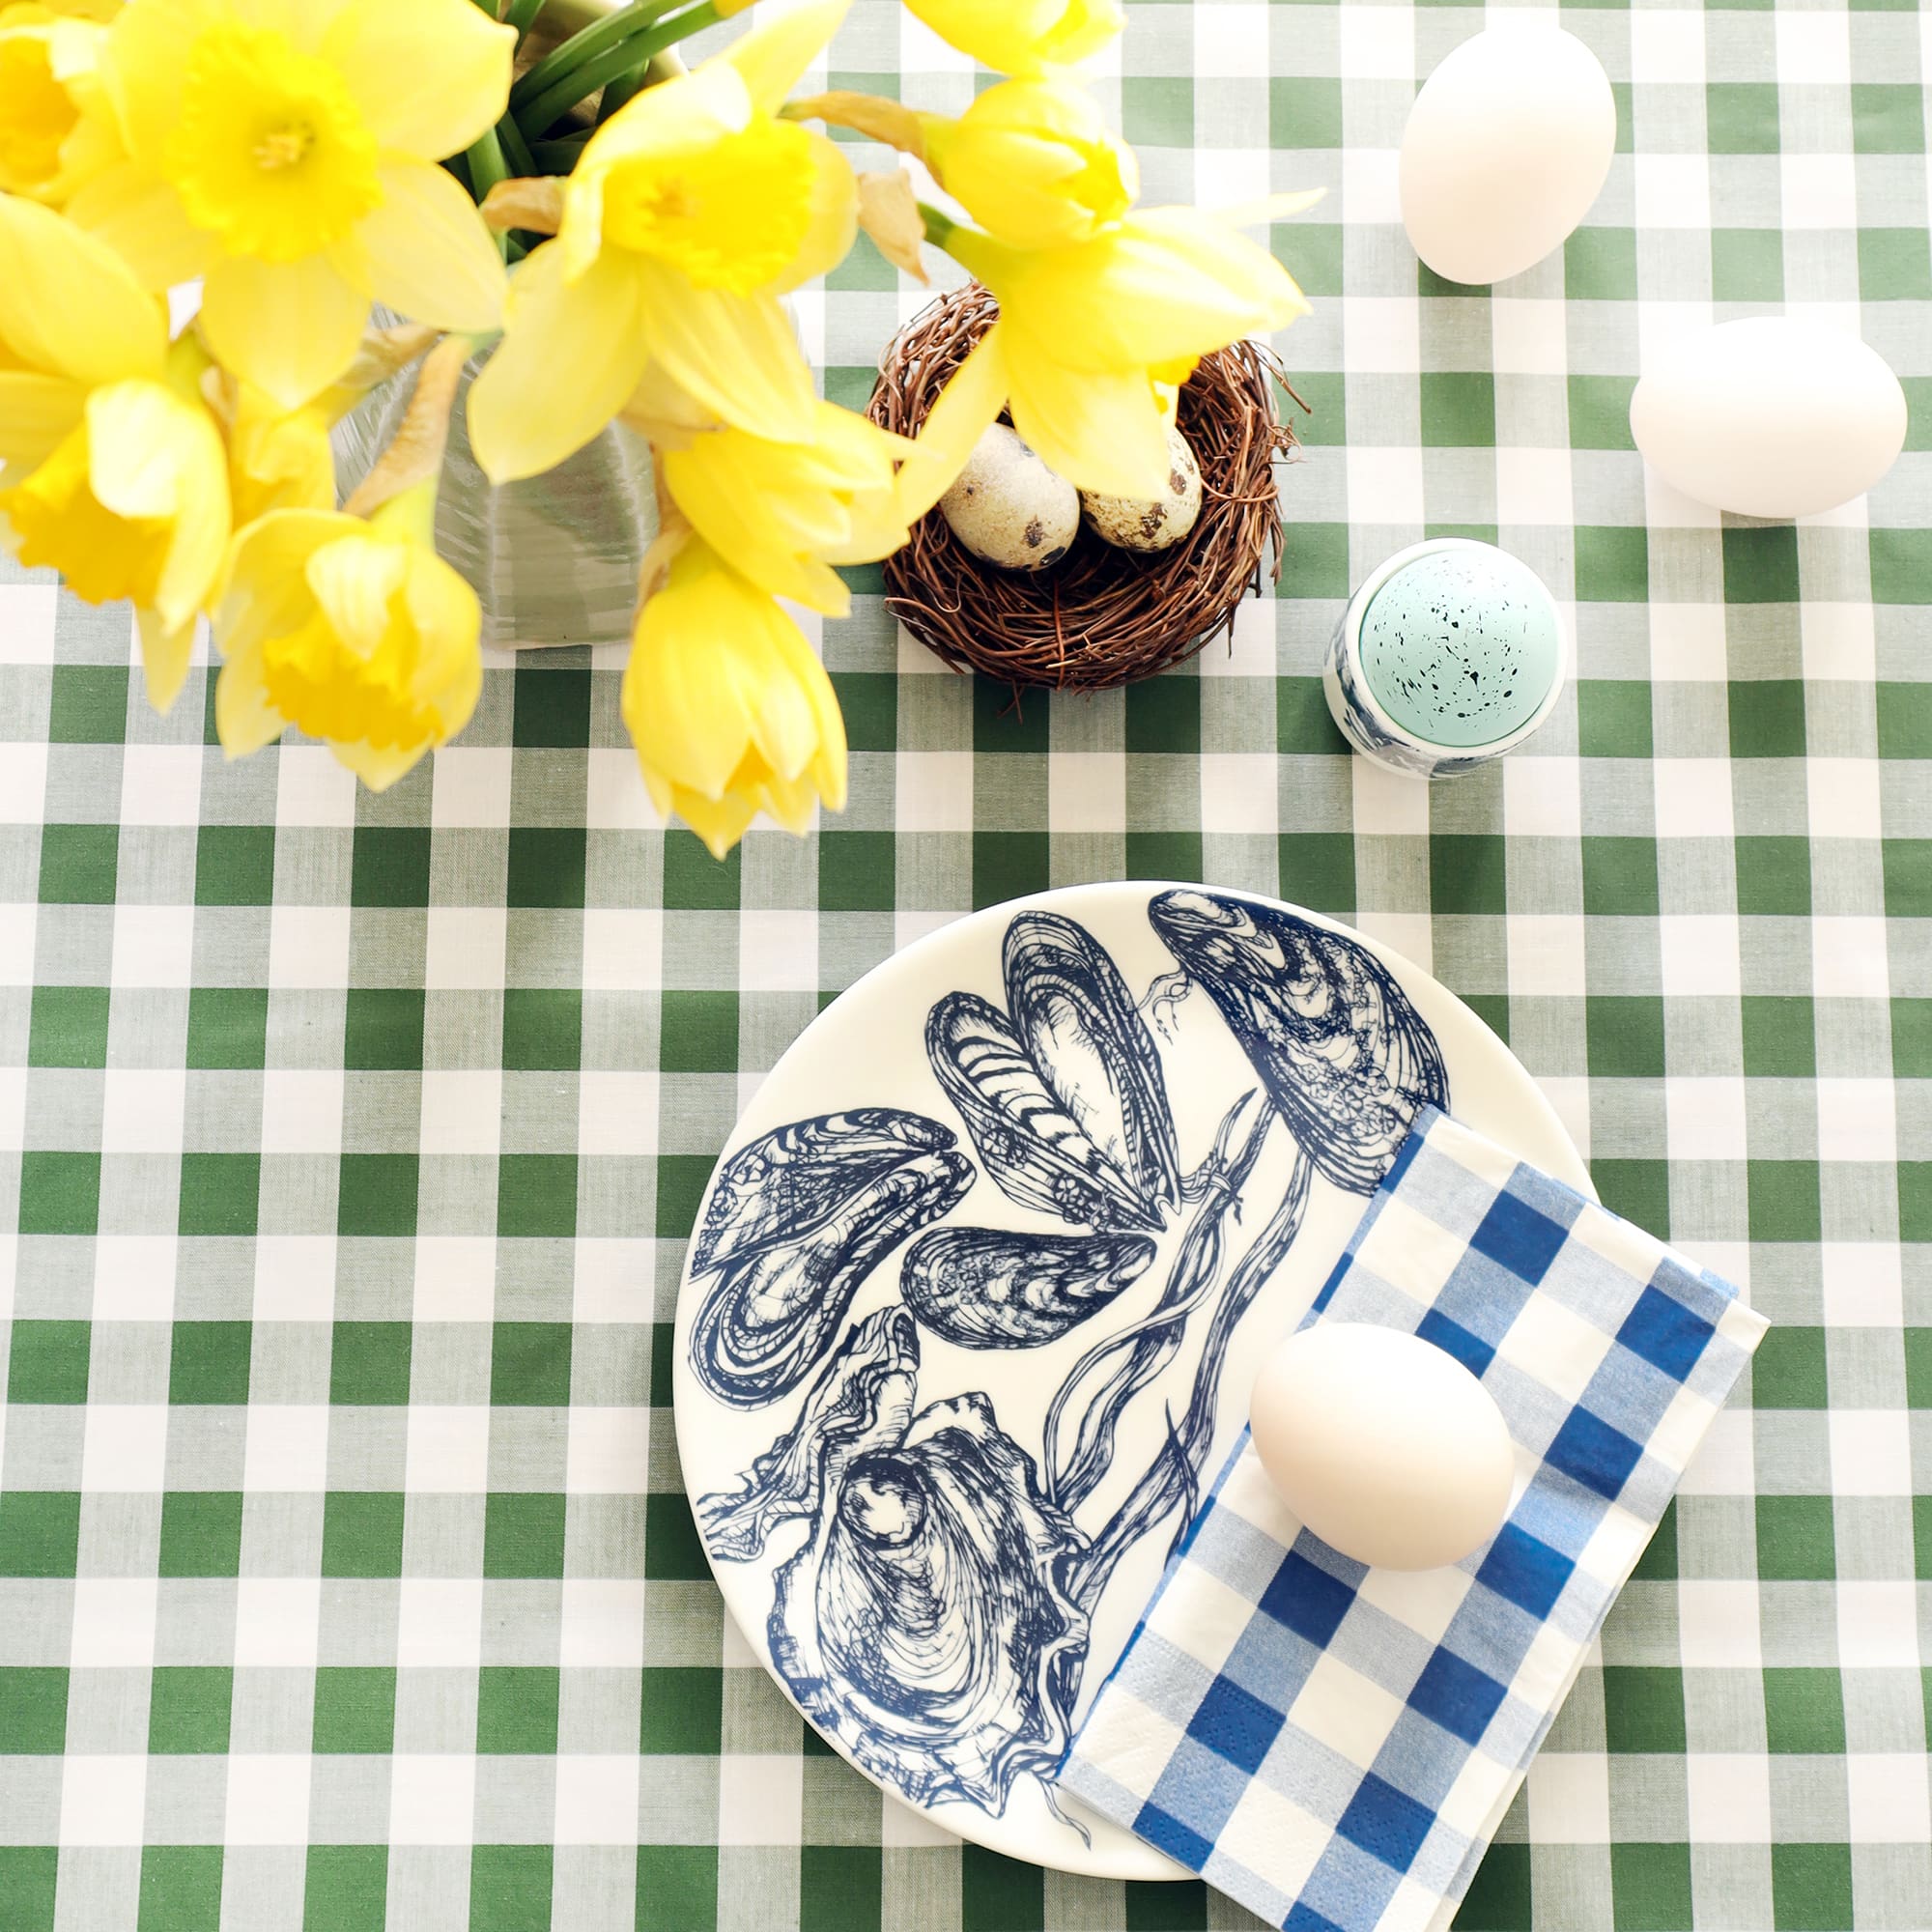 White plate with navy blue mussels & oysters decoration with folded blue gingham napkin and duck egg on it. This is on a green gingham tablecloth with a small nest and quails eggs, hyacinths and anemones and more eggs.